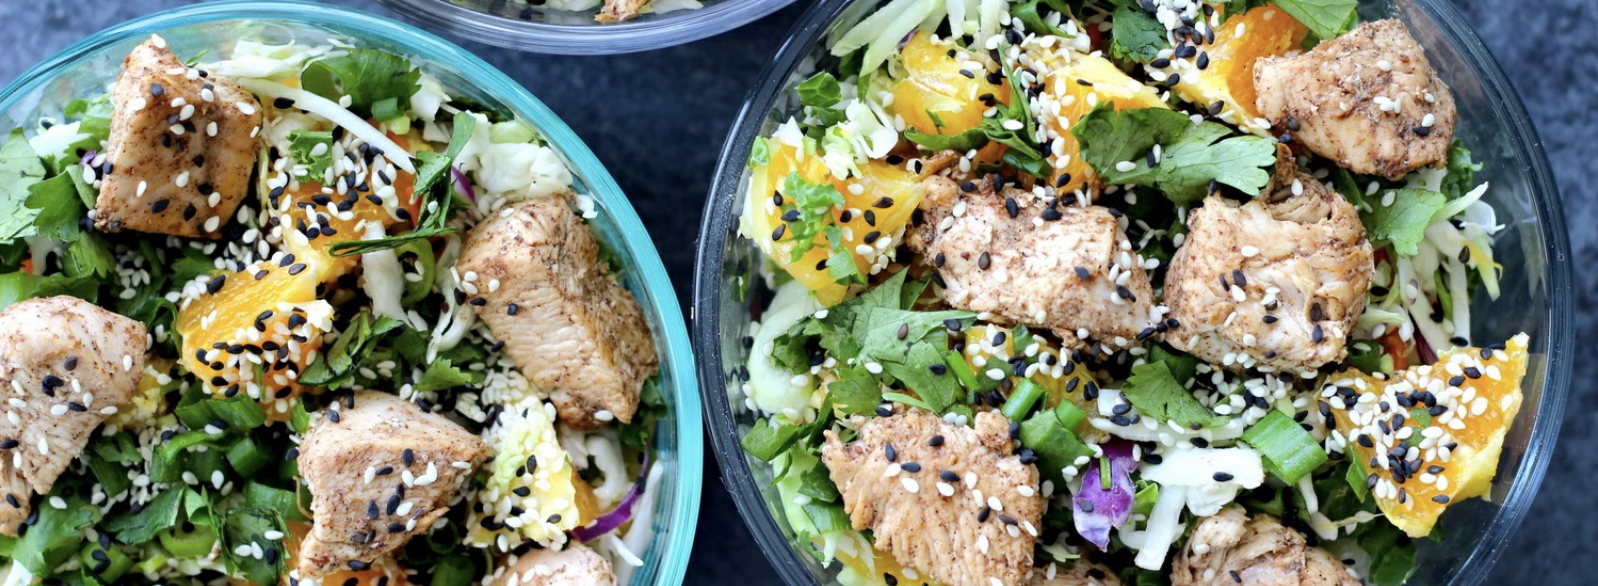 sesame chicken chopped salad with oranges, cilantro, and sesame seeds